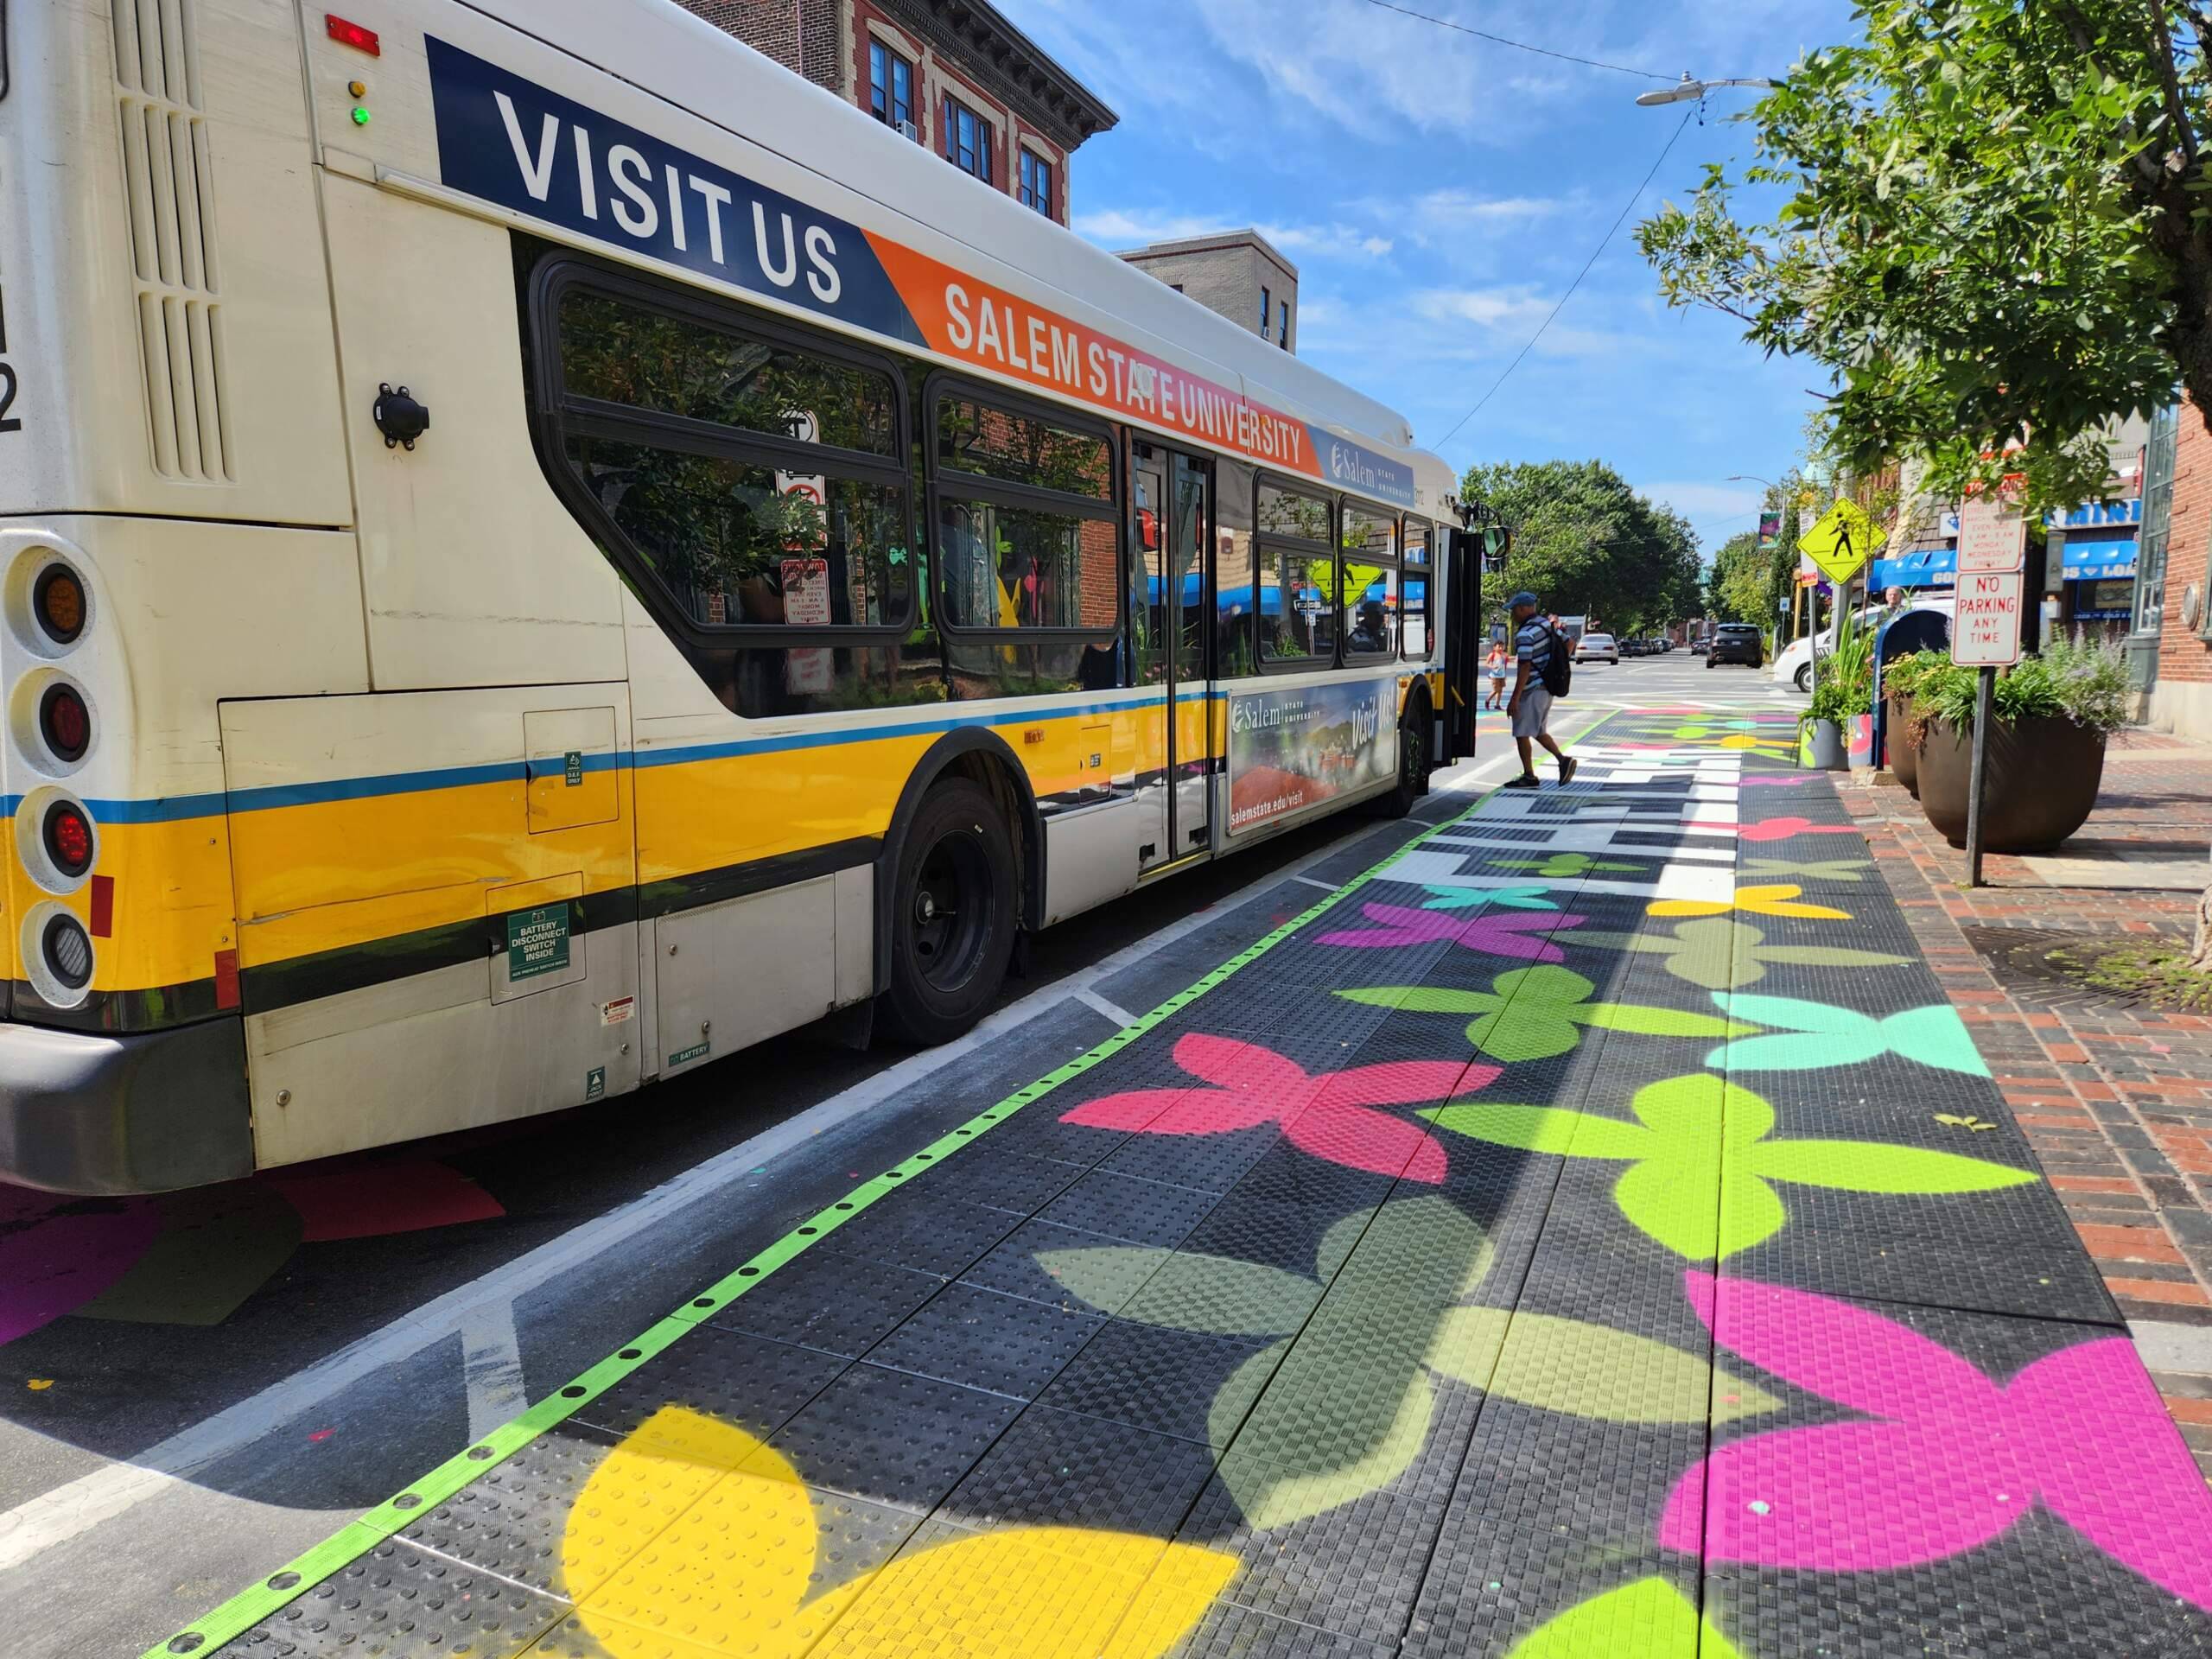 A bus ramp is being piloted at Broadway and 3rd Street in Chelsea. The city unveiled the ramp and an accompanying art installation called Flower Walk at the bus stop where the ramp is located.